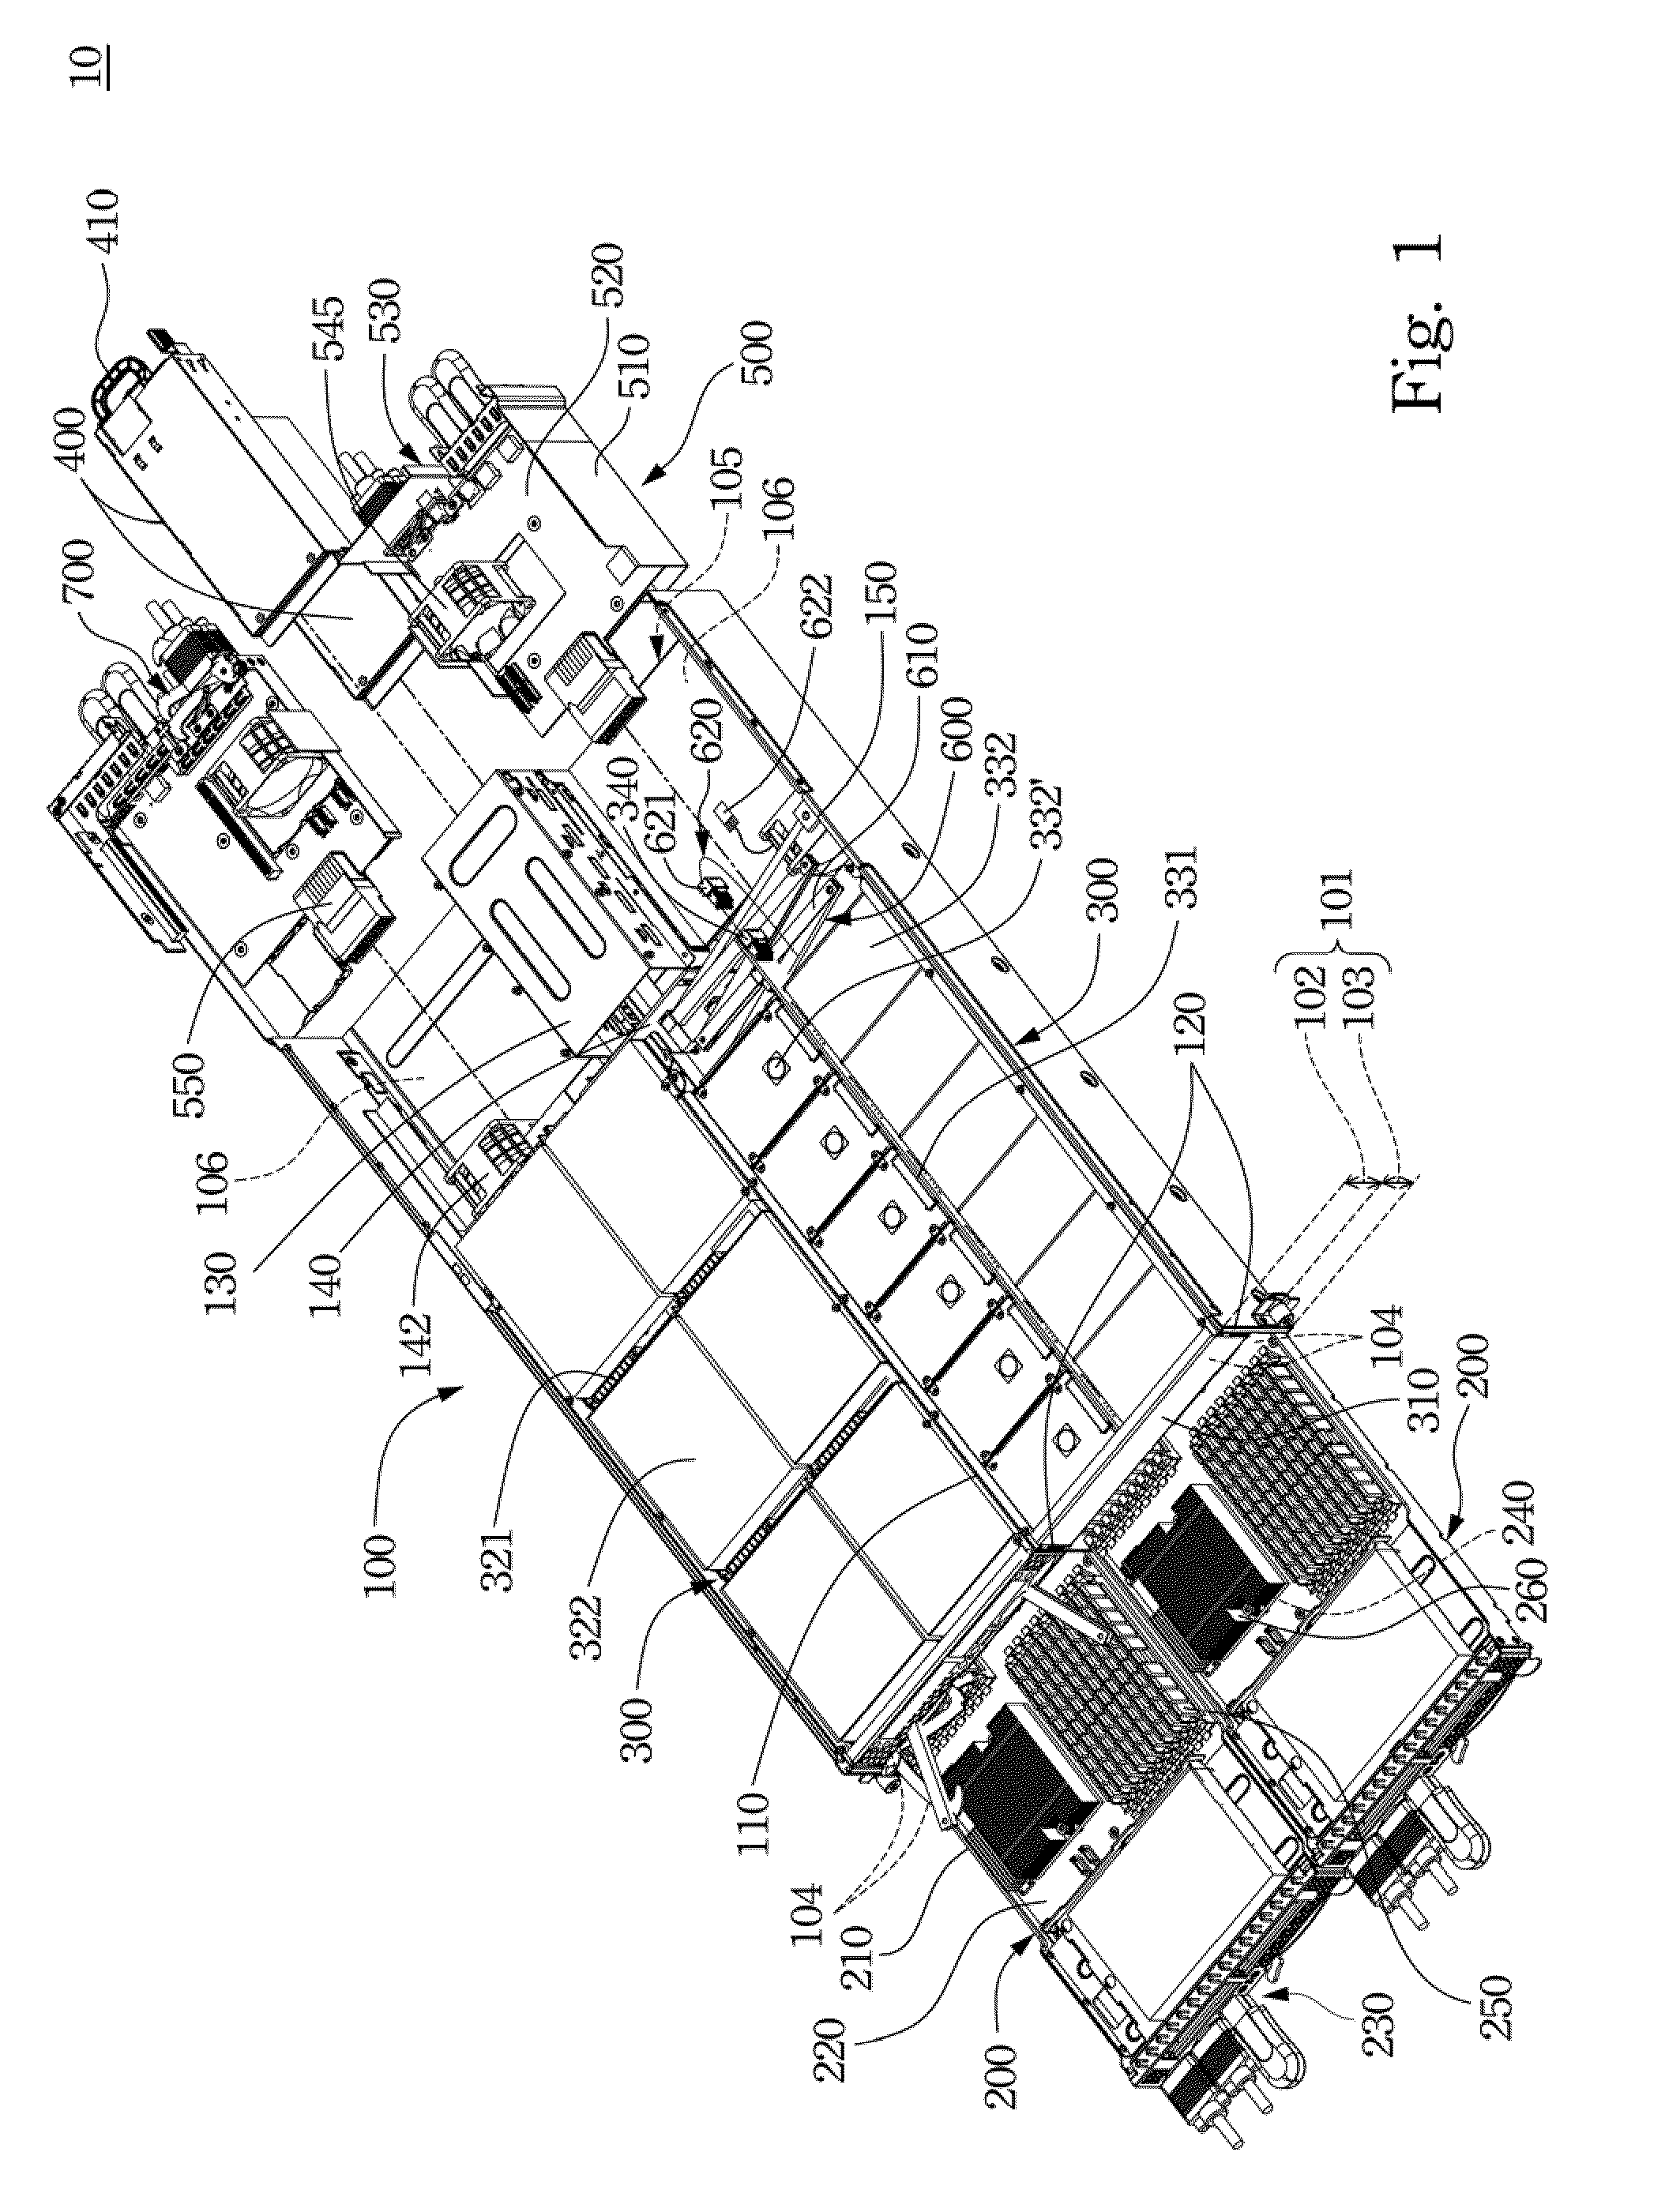 Server device with a storage array module